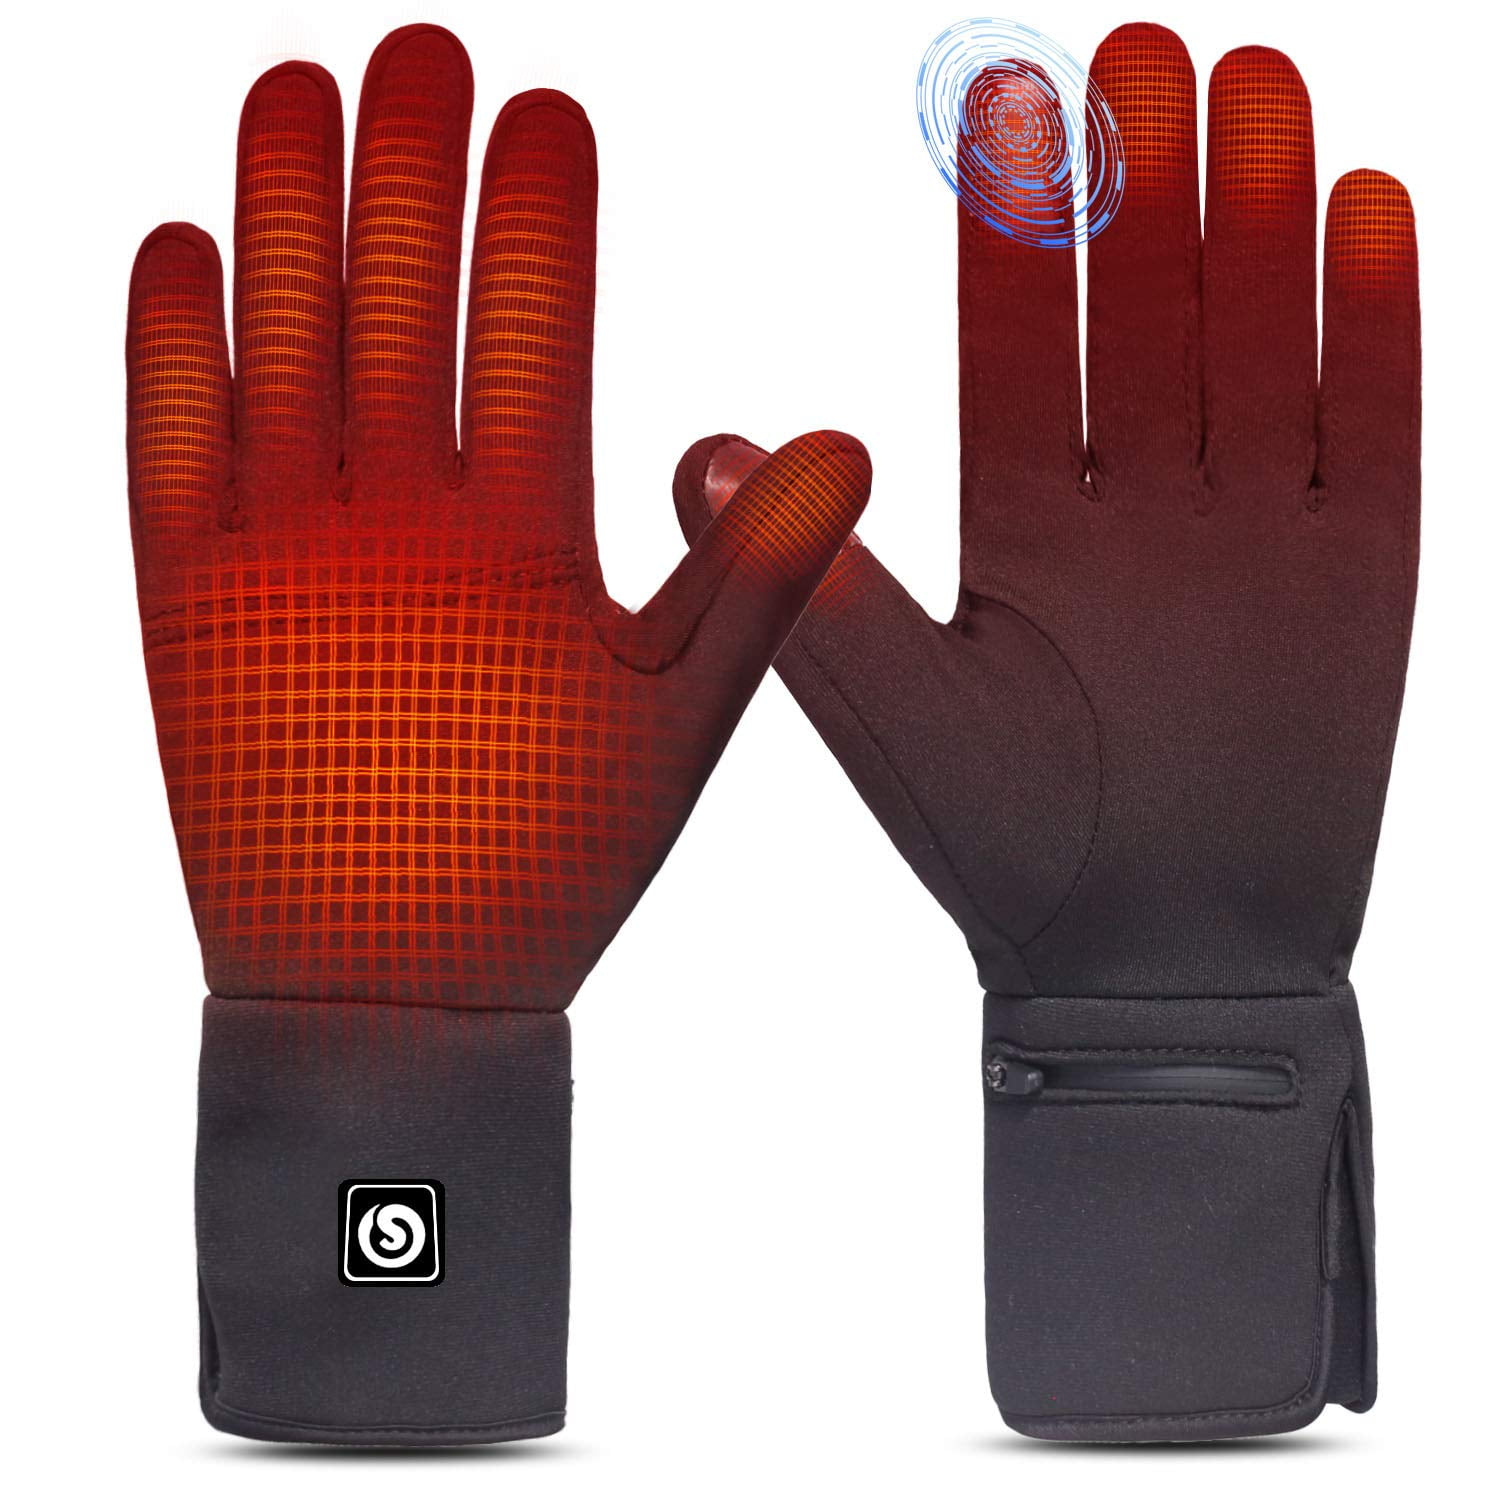 Details about   Heated Ski Gloves Snowboarding Snowmobile Winter Electric Battery Powered Warm 